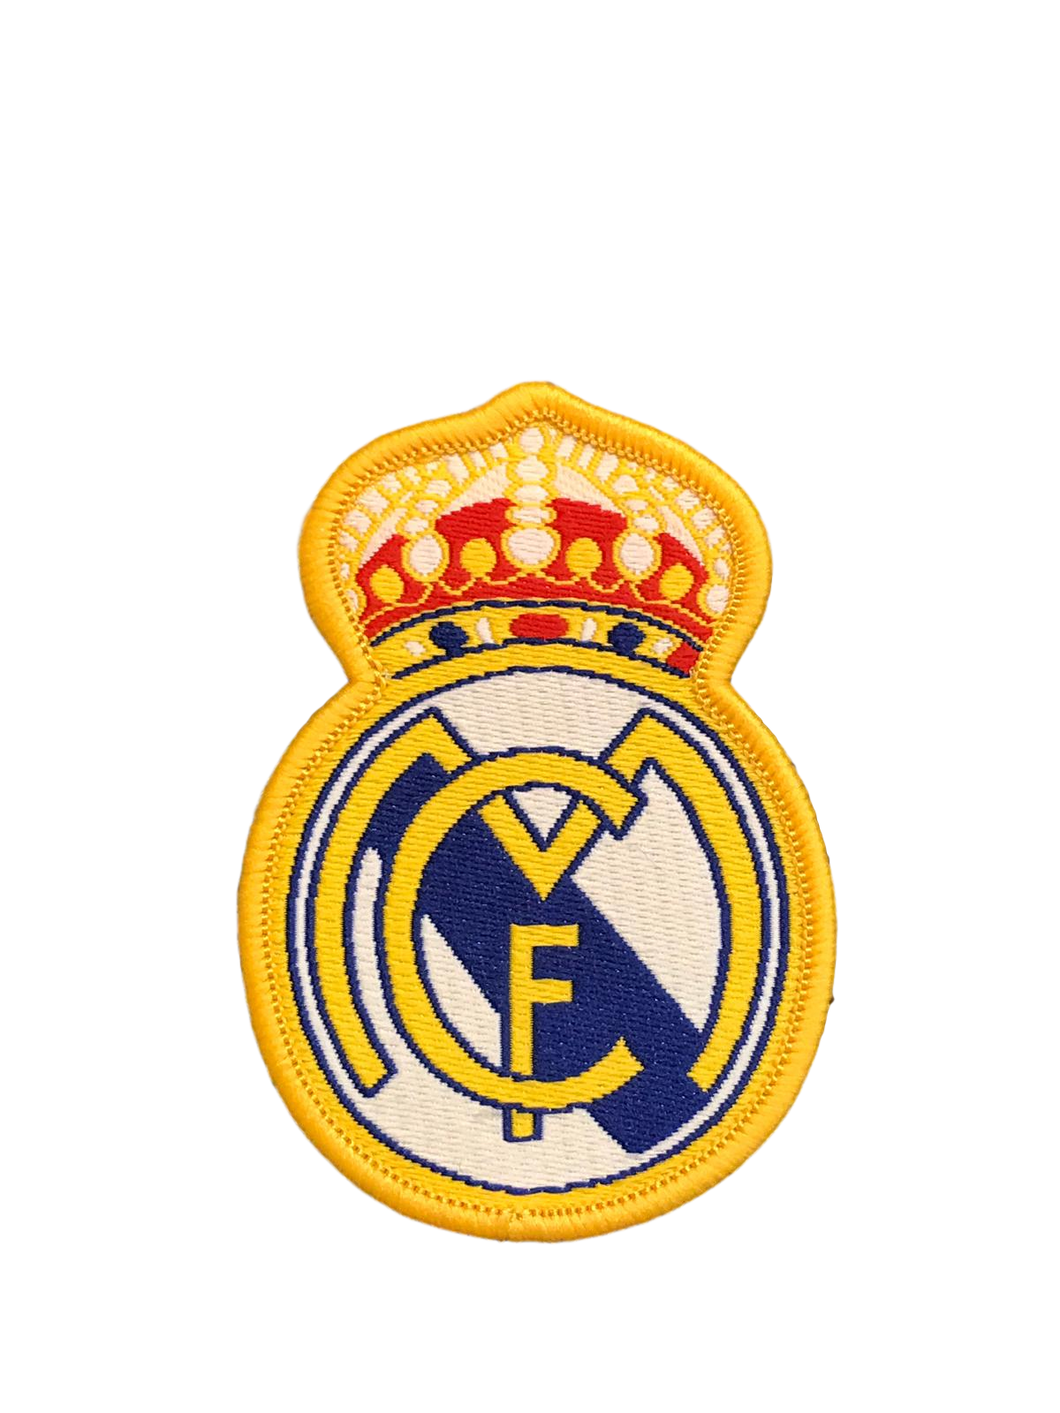 Real Madrid C.F. Football Club FC DIY Embroidered Sew Iron on Patch UK Seller